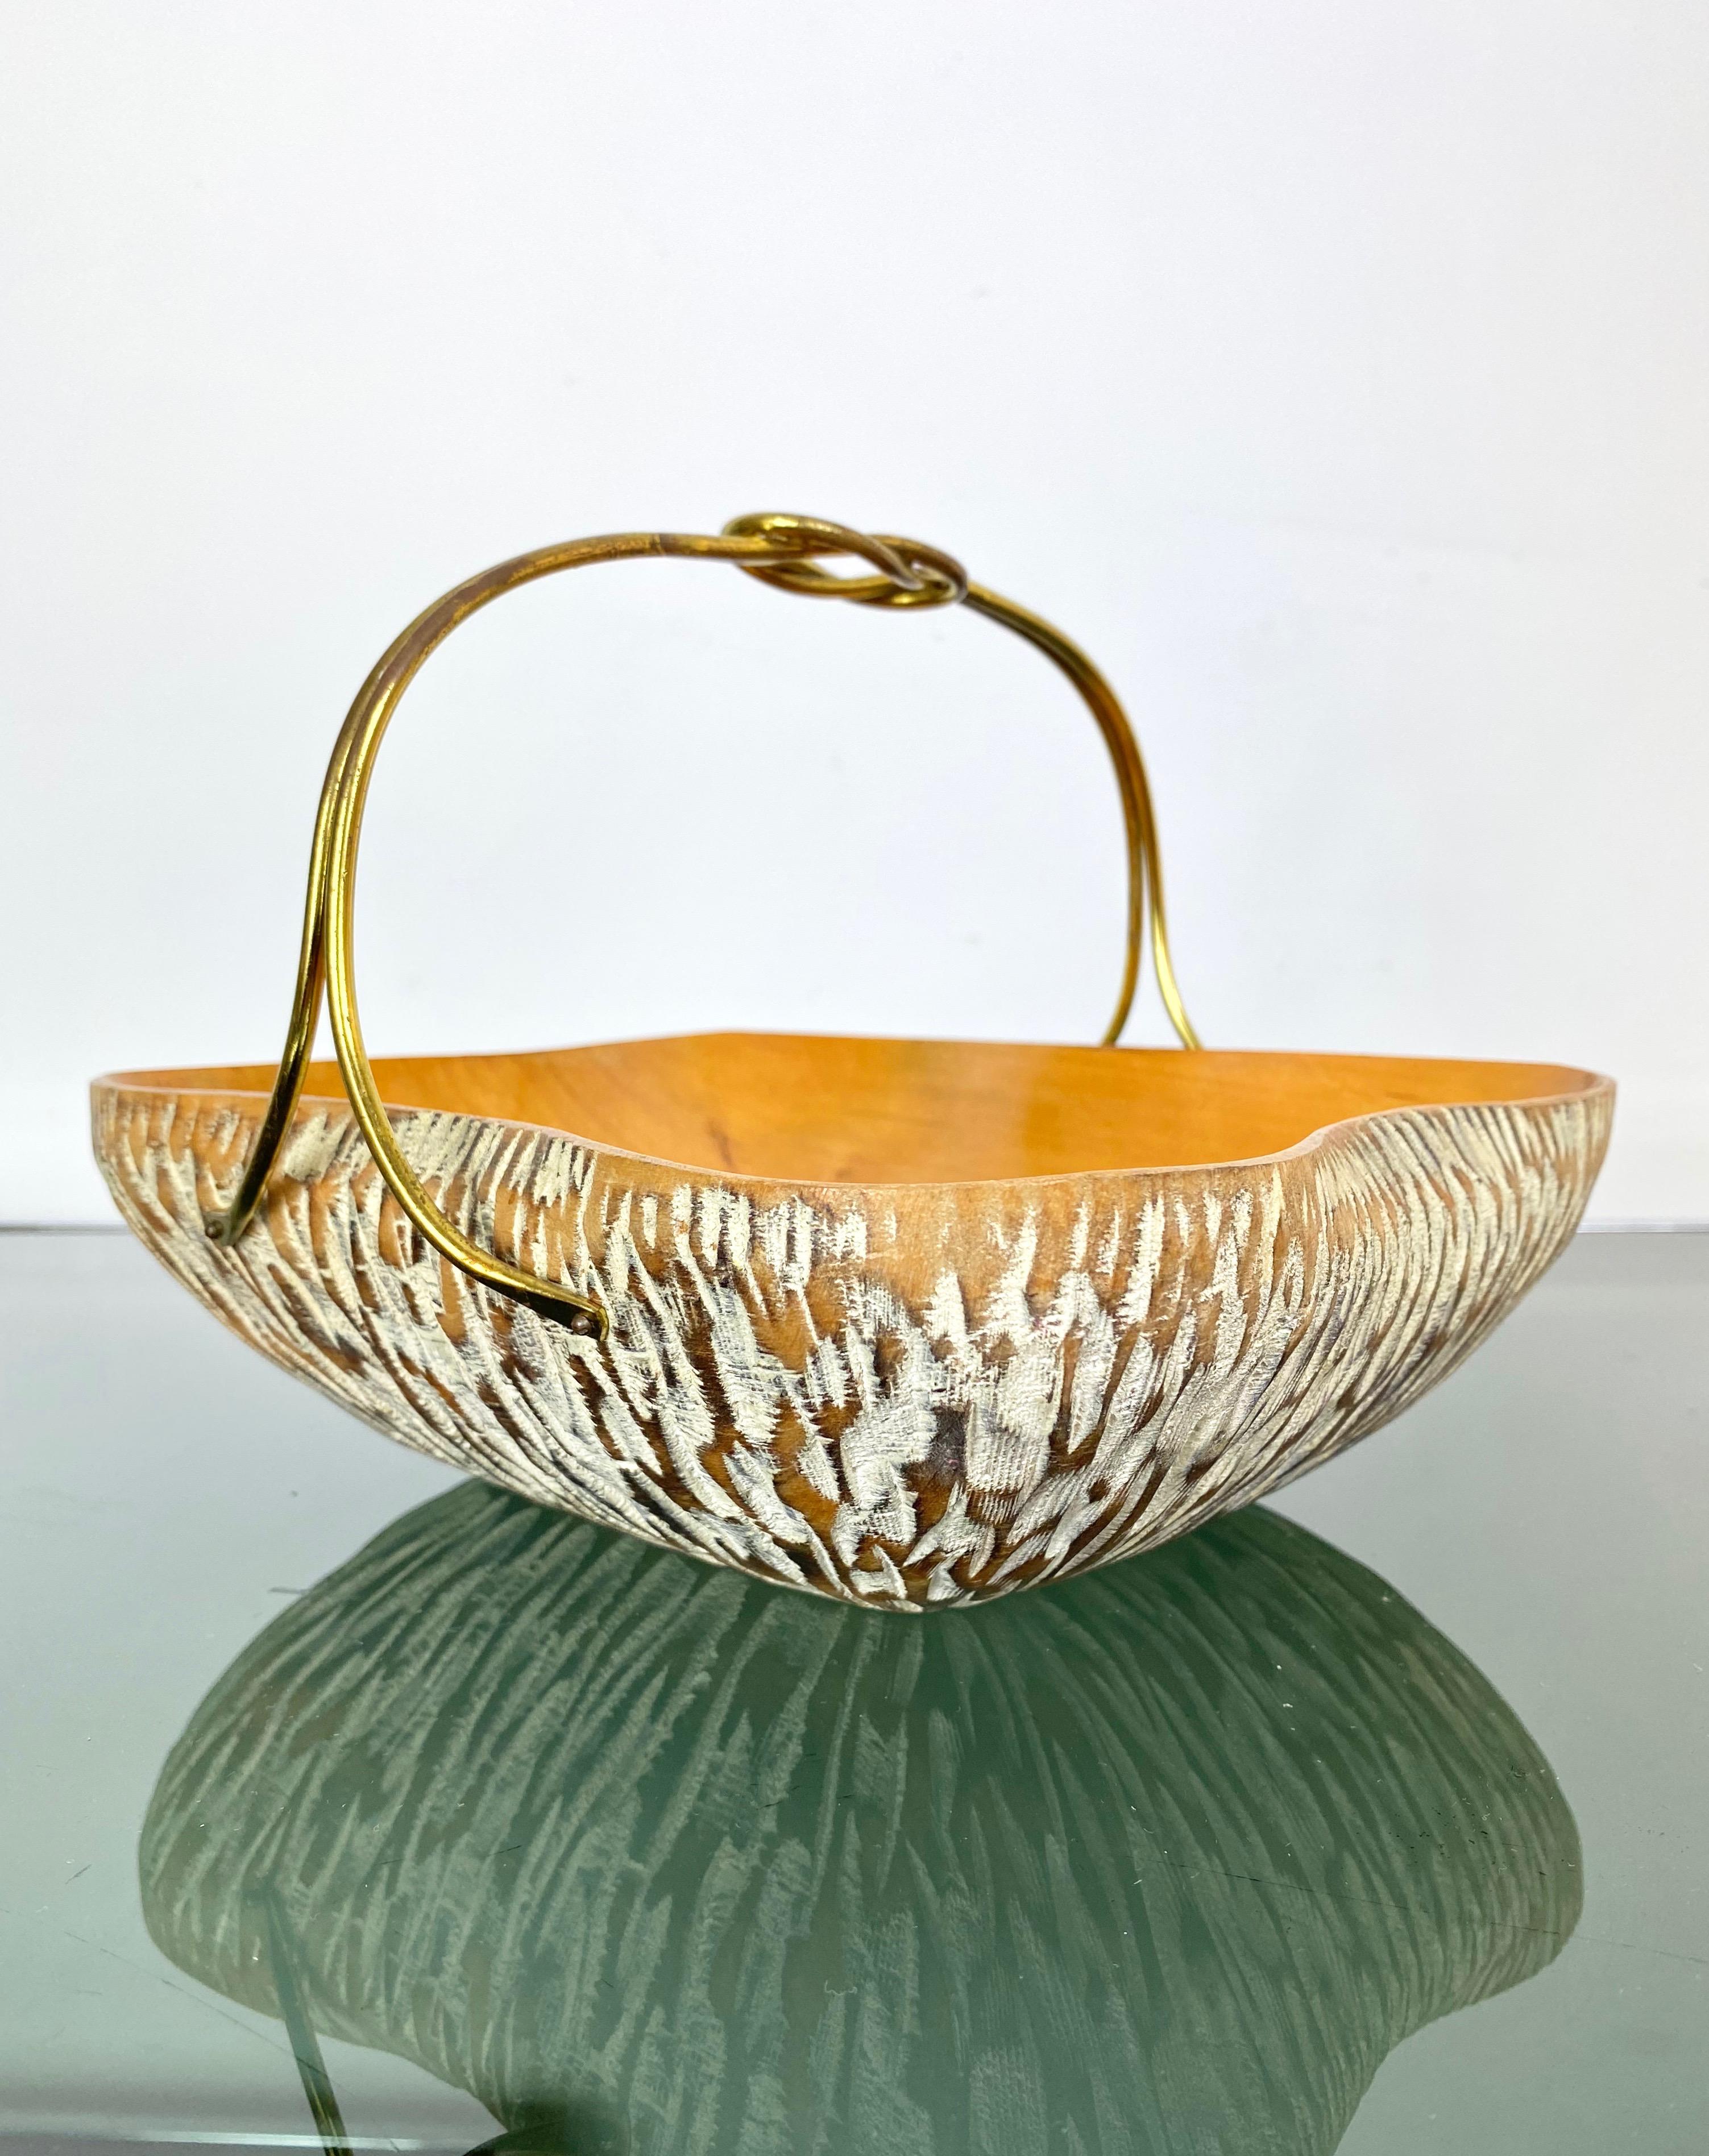 Carved Aldo Tura for Macabo Walnut Bowl Basket Centrepiece Wood and Brass, Italy, 1950s For Sale